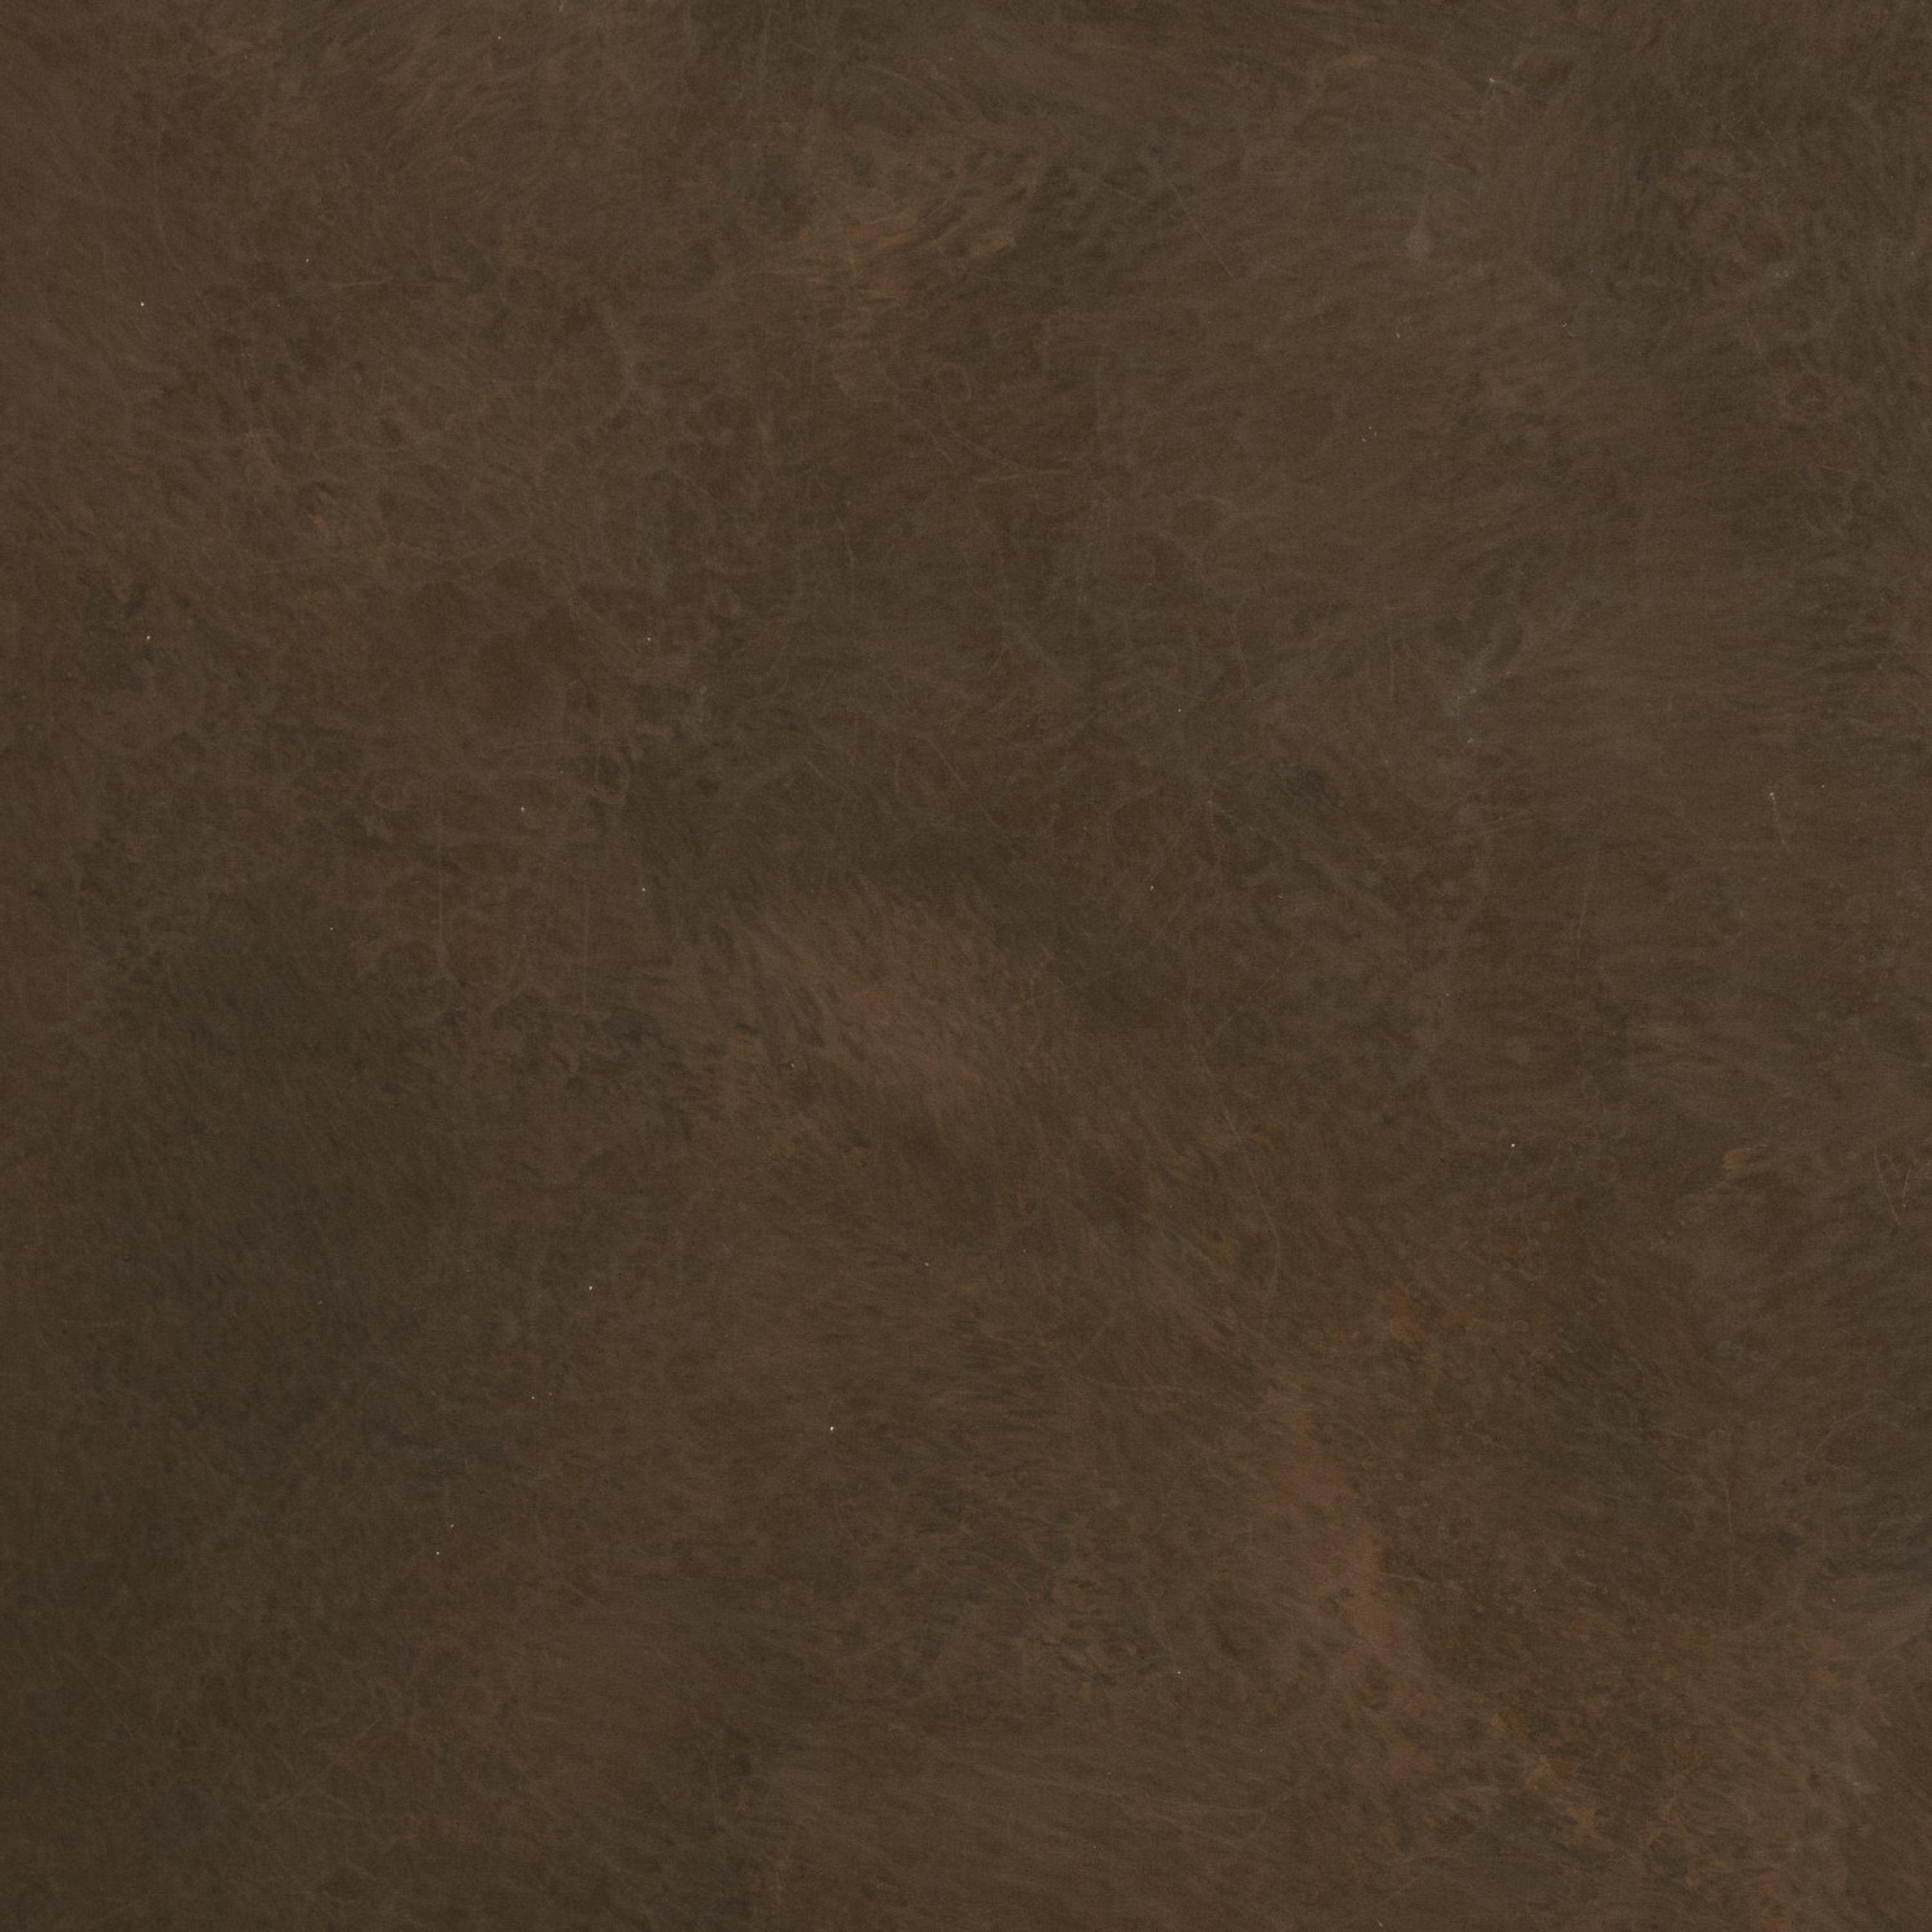 Gravity Backdrops Brown Mid Texture M